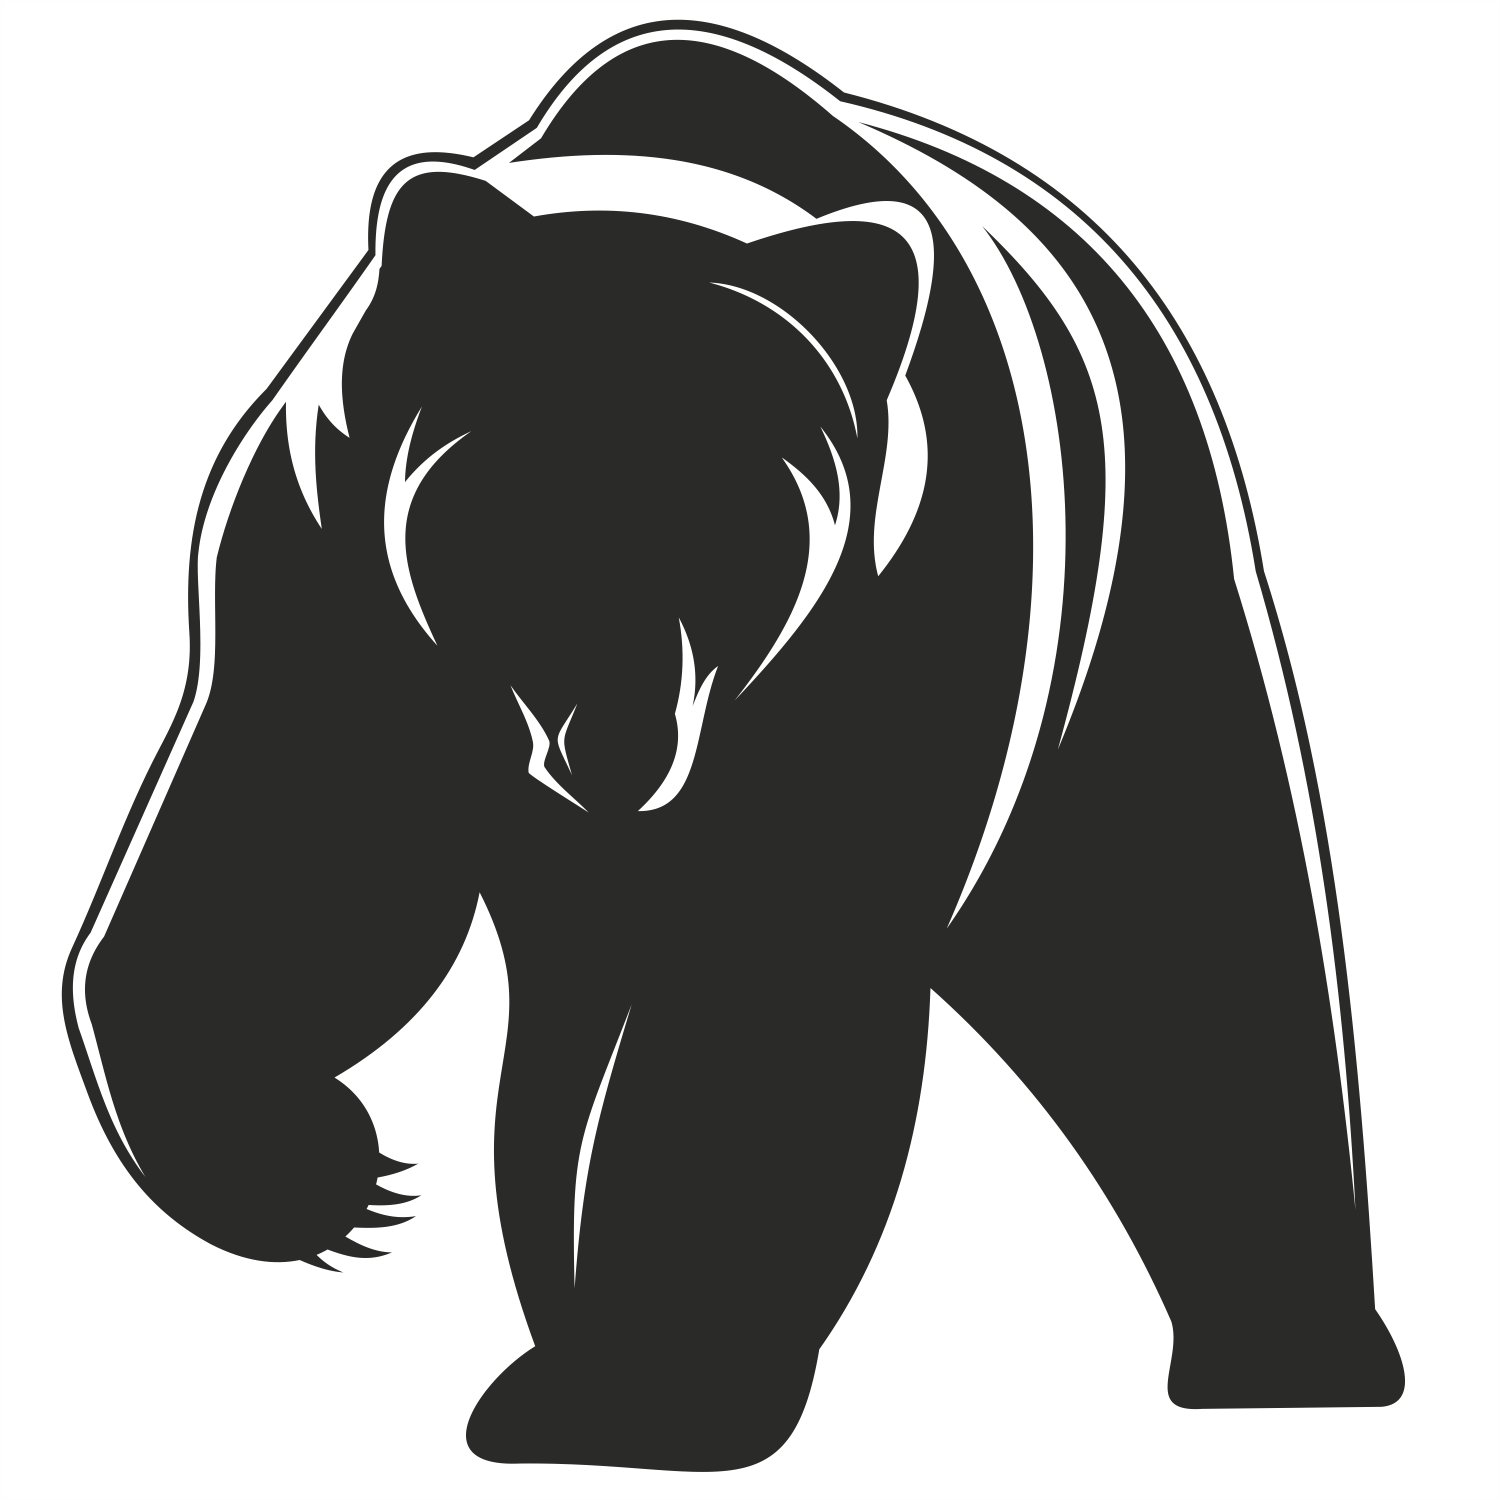 Bear PNG Images On this site 